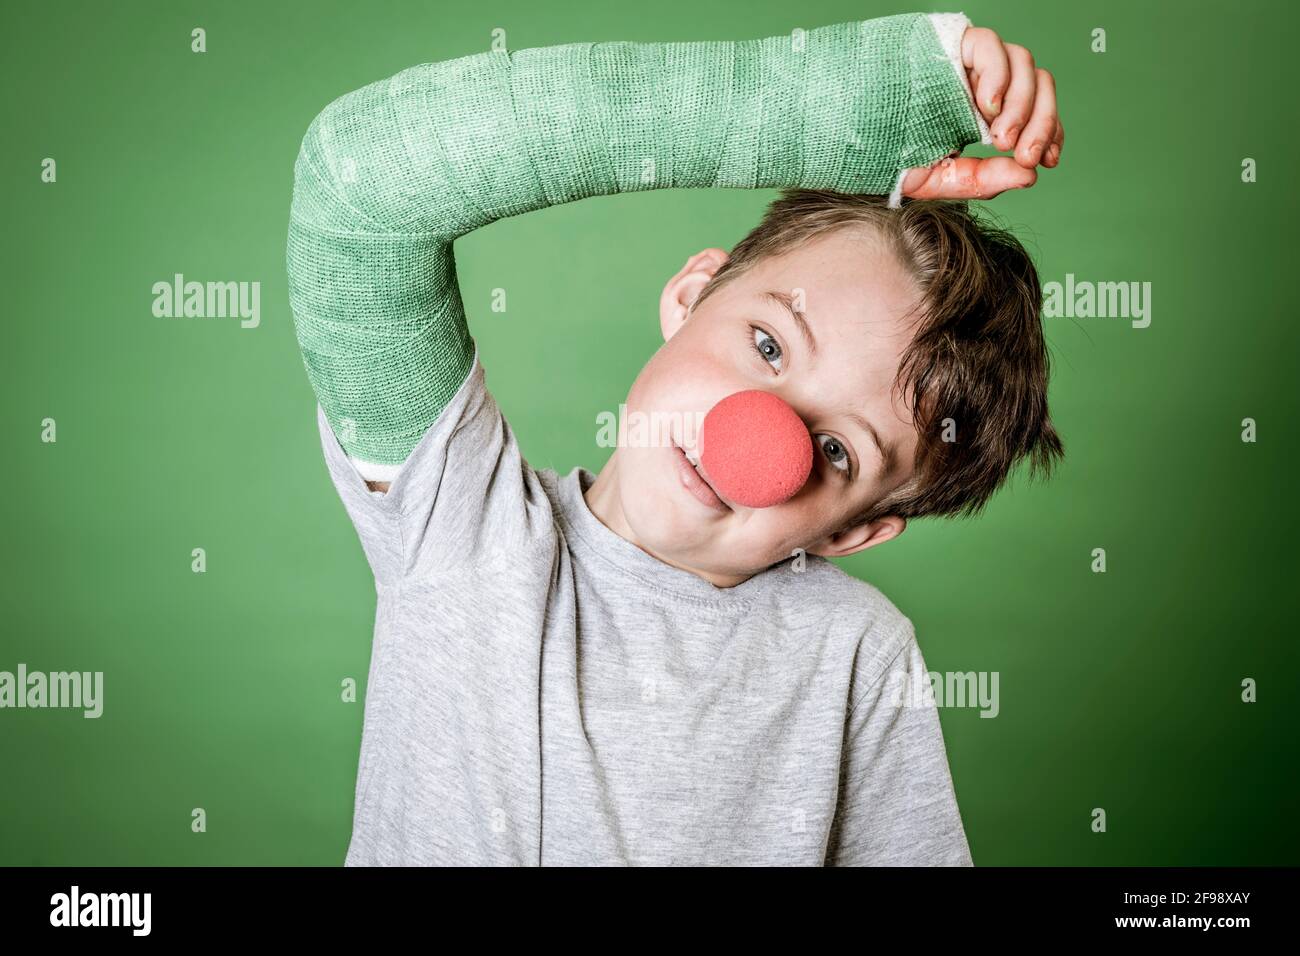 cool, cute schoolboy with green hand plaster and red clown nose is posing in front of green background Stock Photo